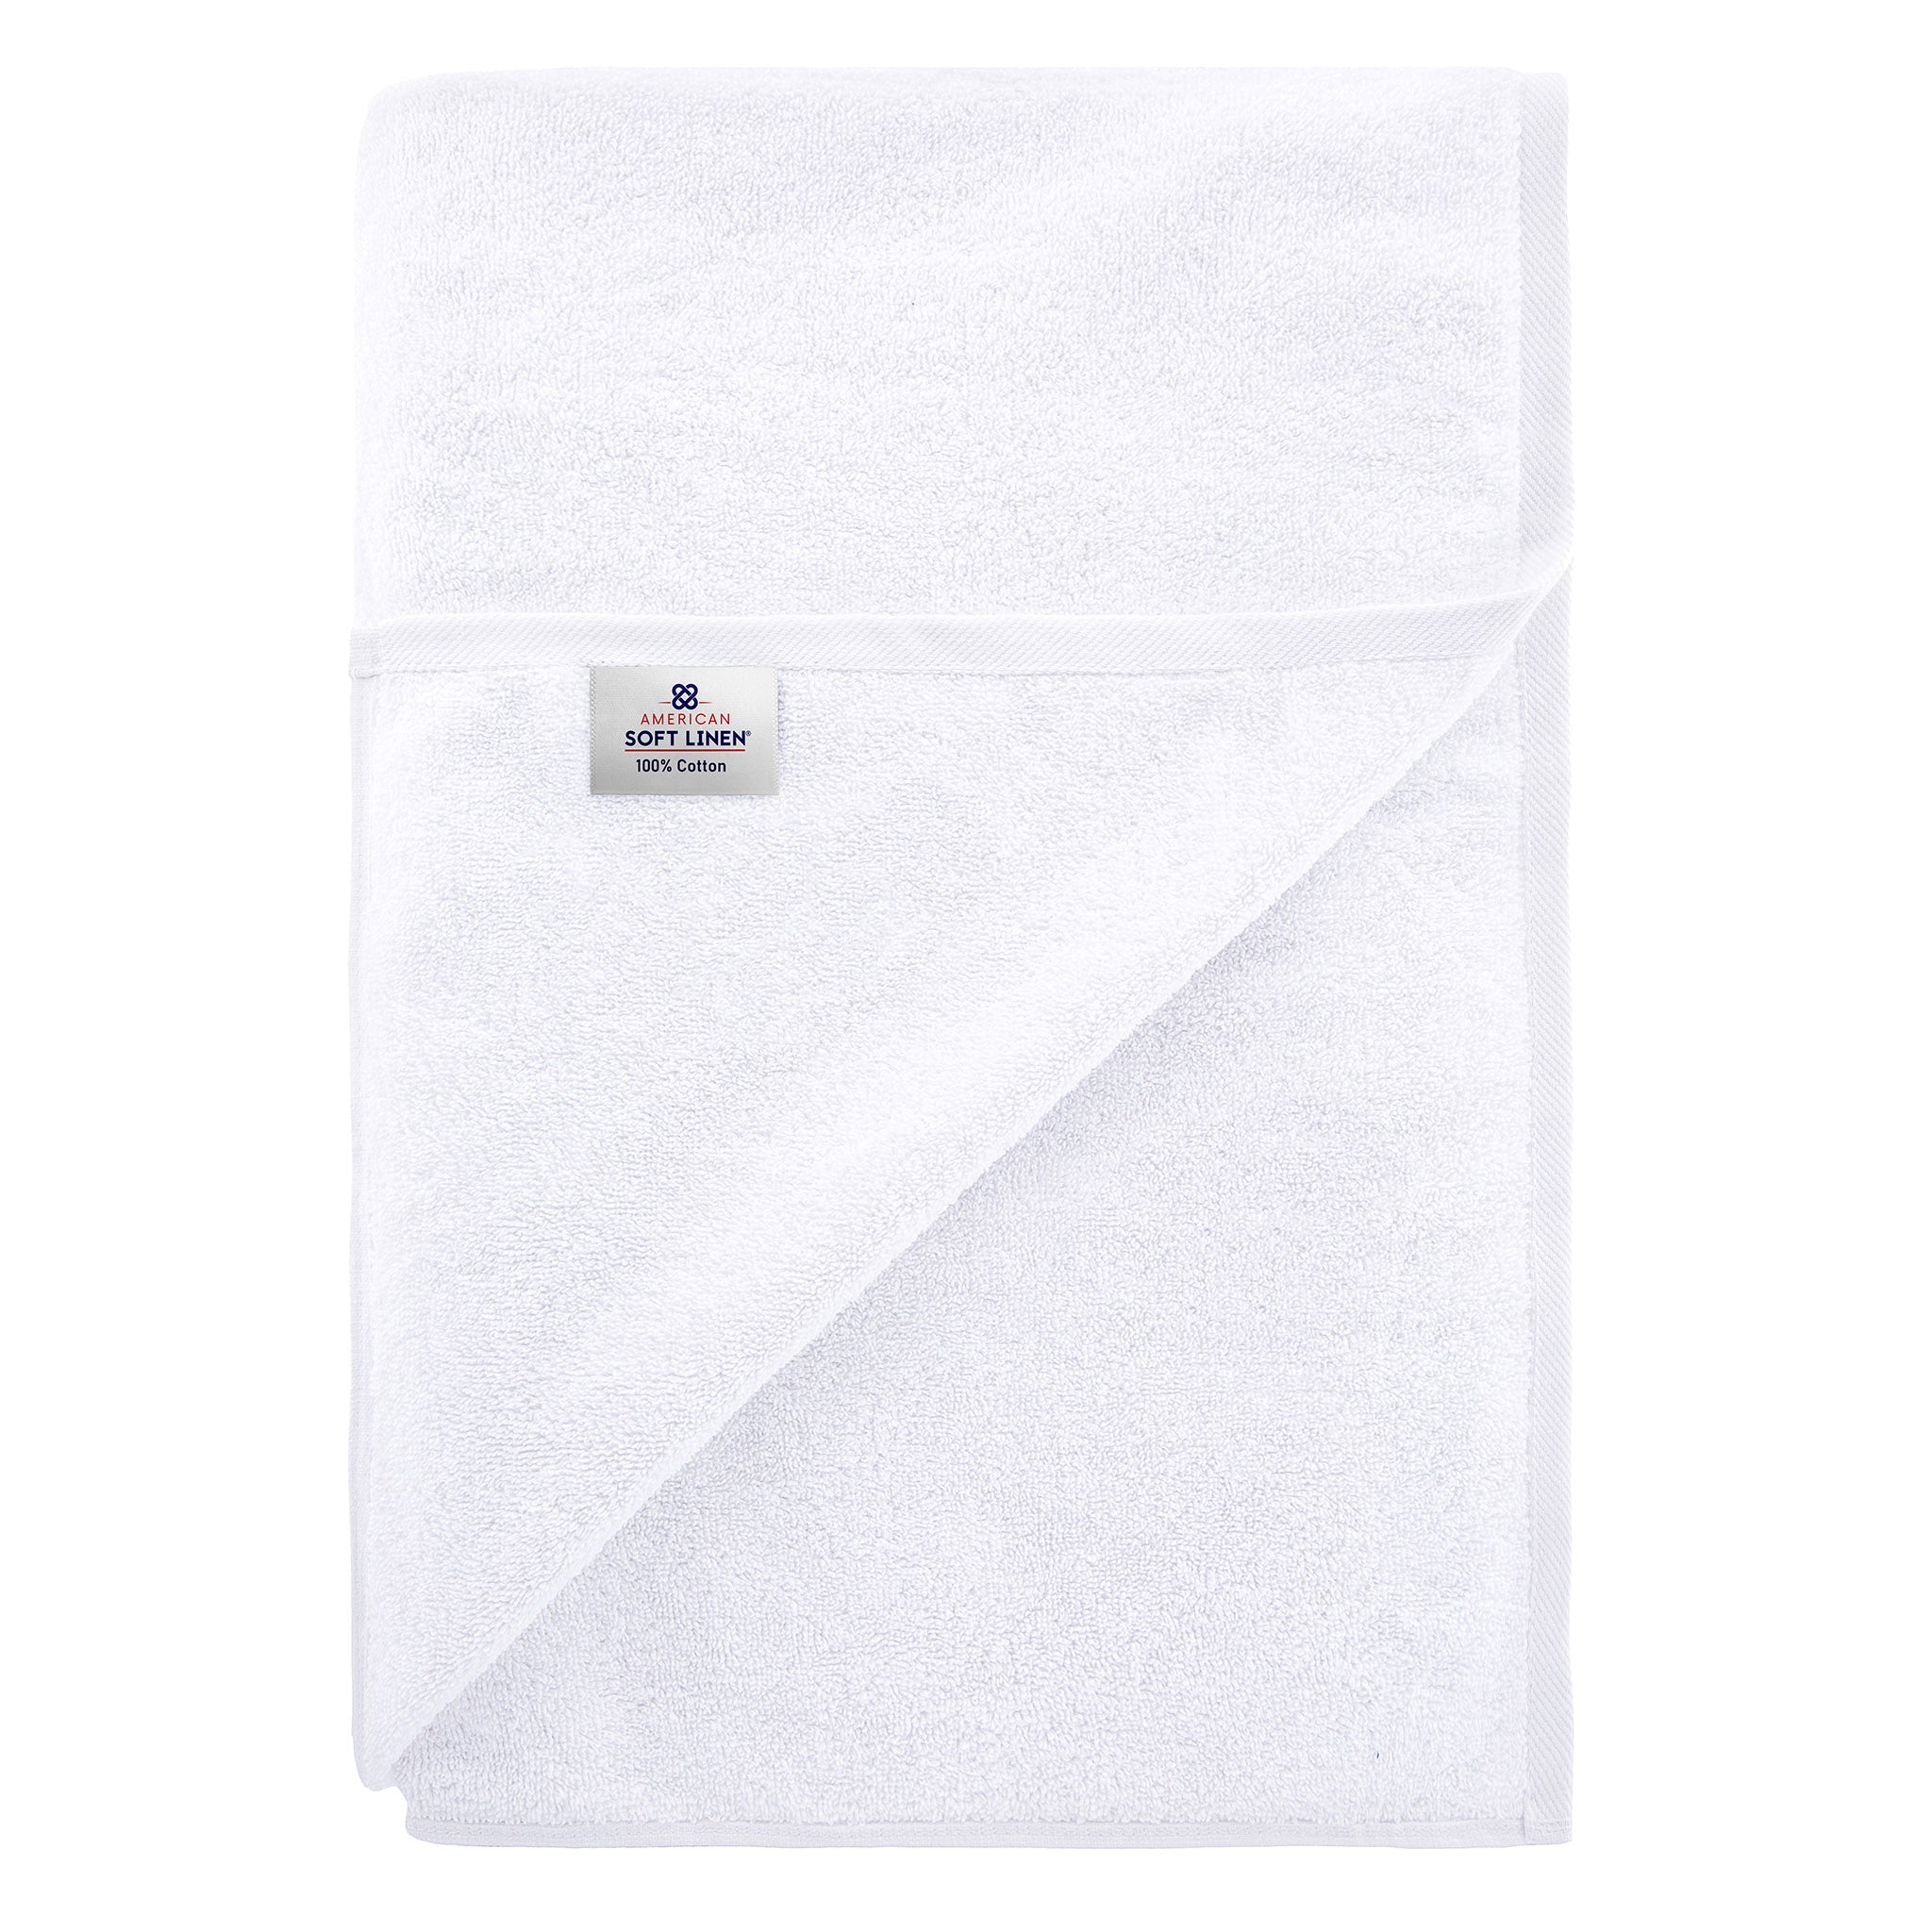 American Soft Linen 100% Ring Spun Cotton 40x80 Inches Oversized Bath Sheets white-7